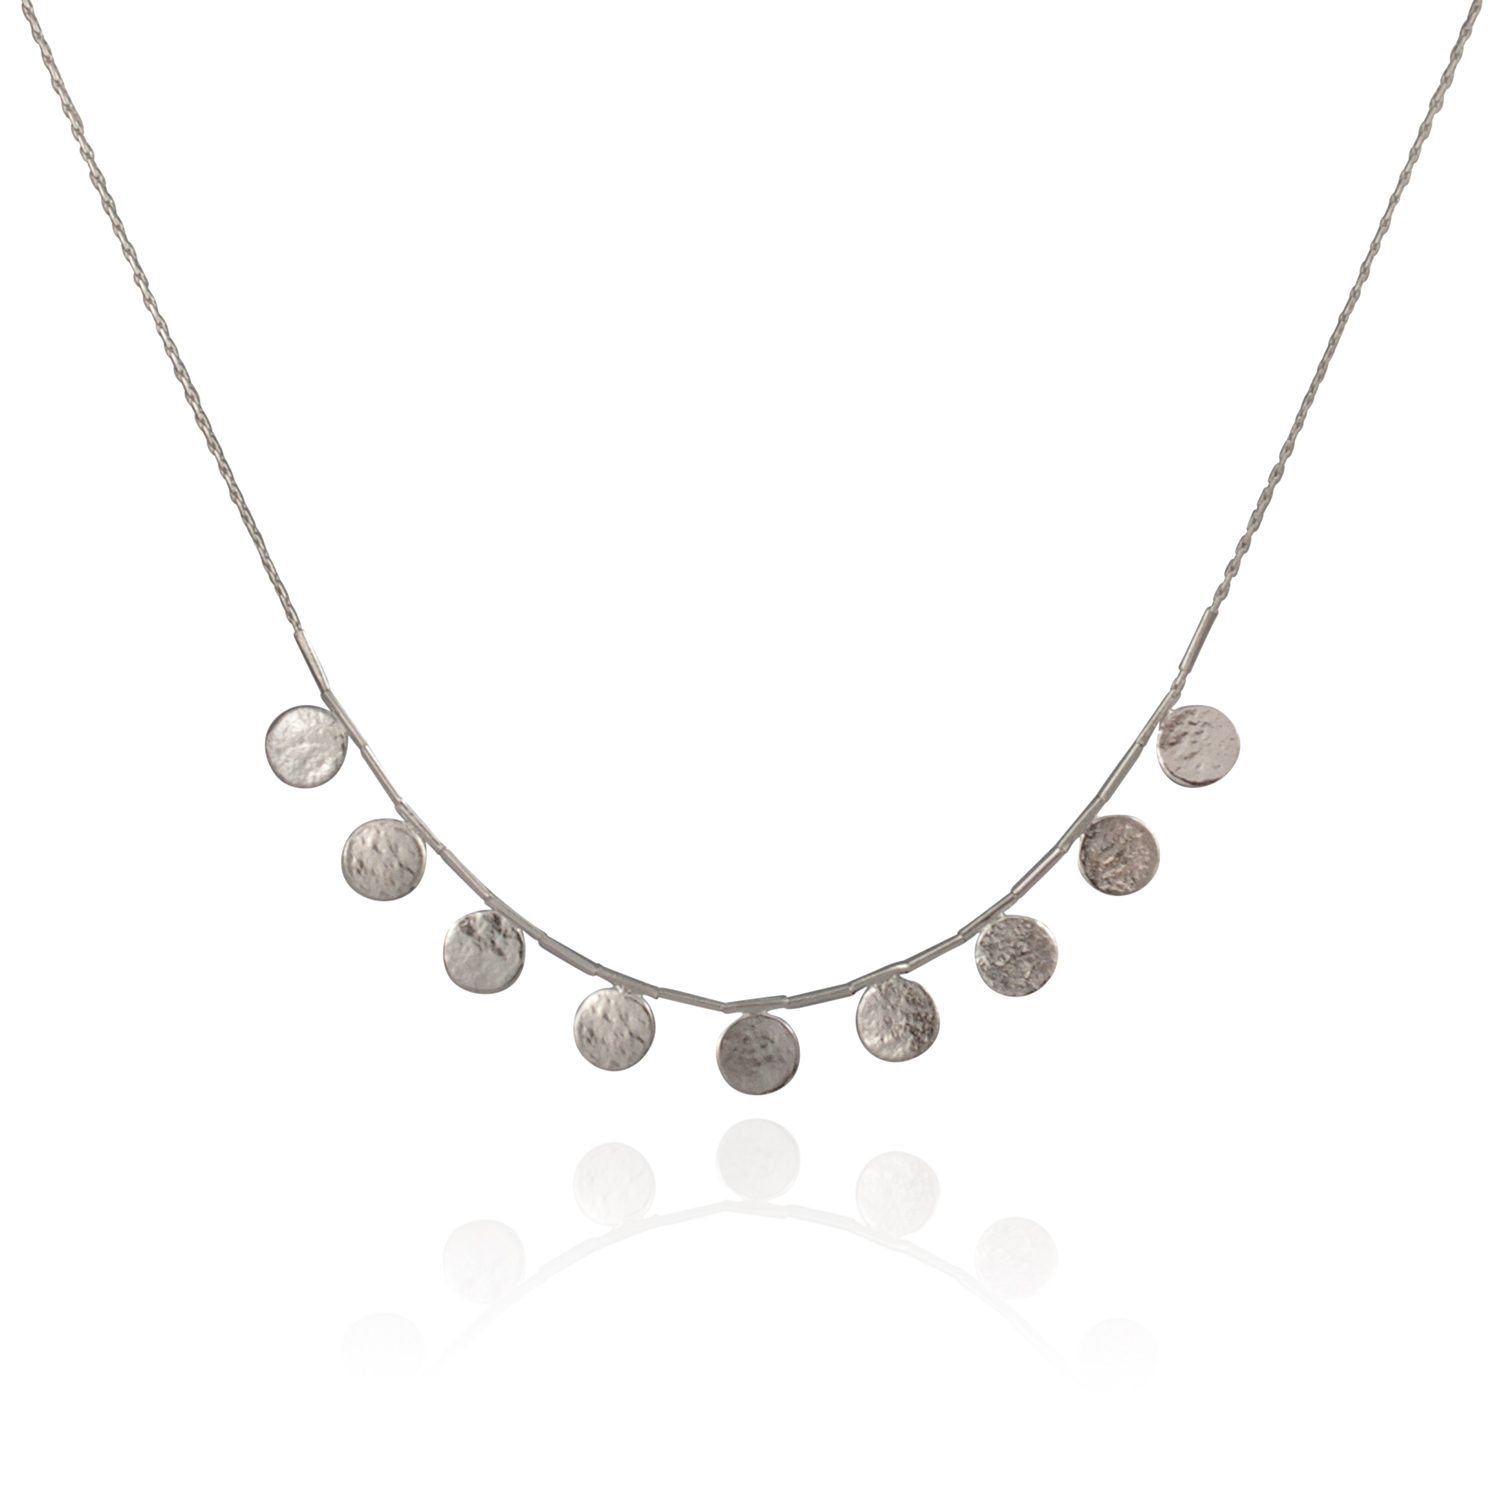 Textured Circle necklace